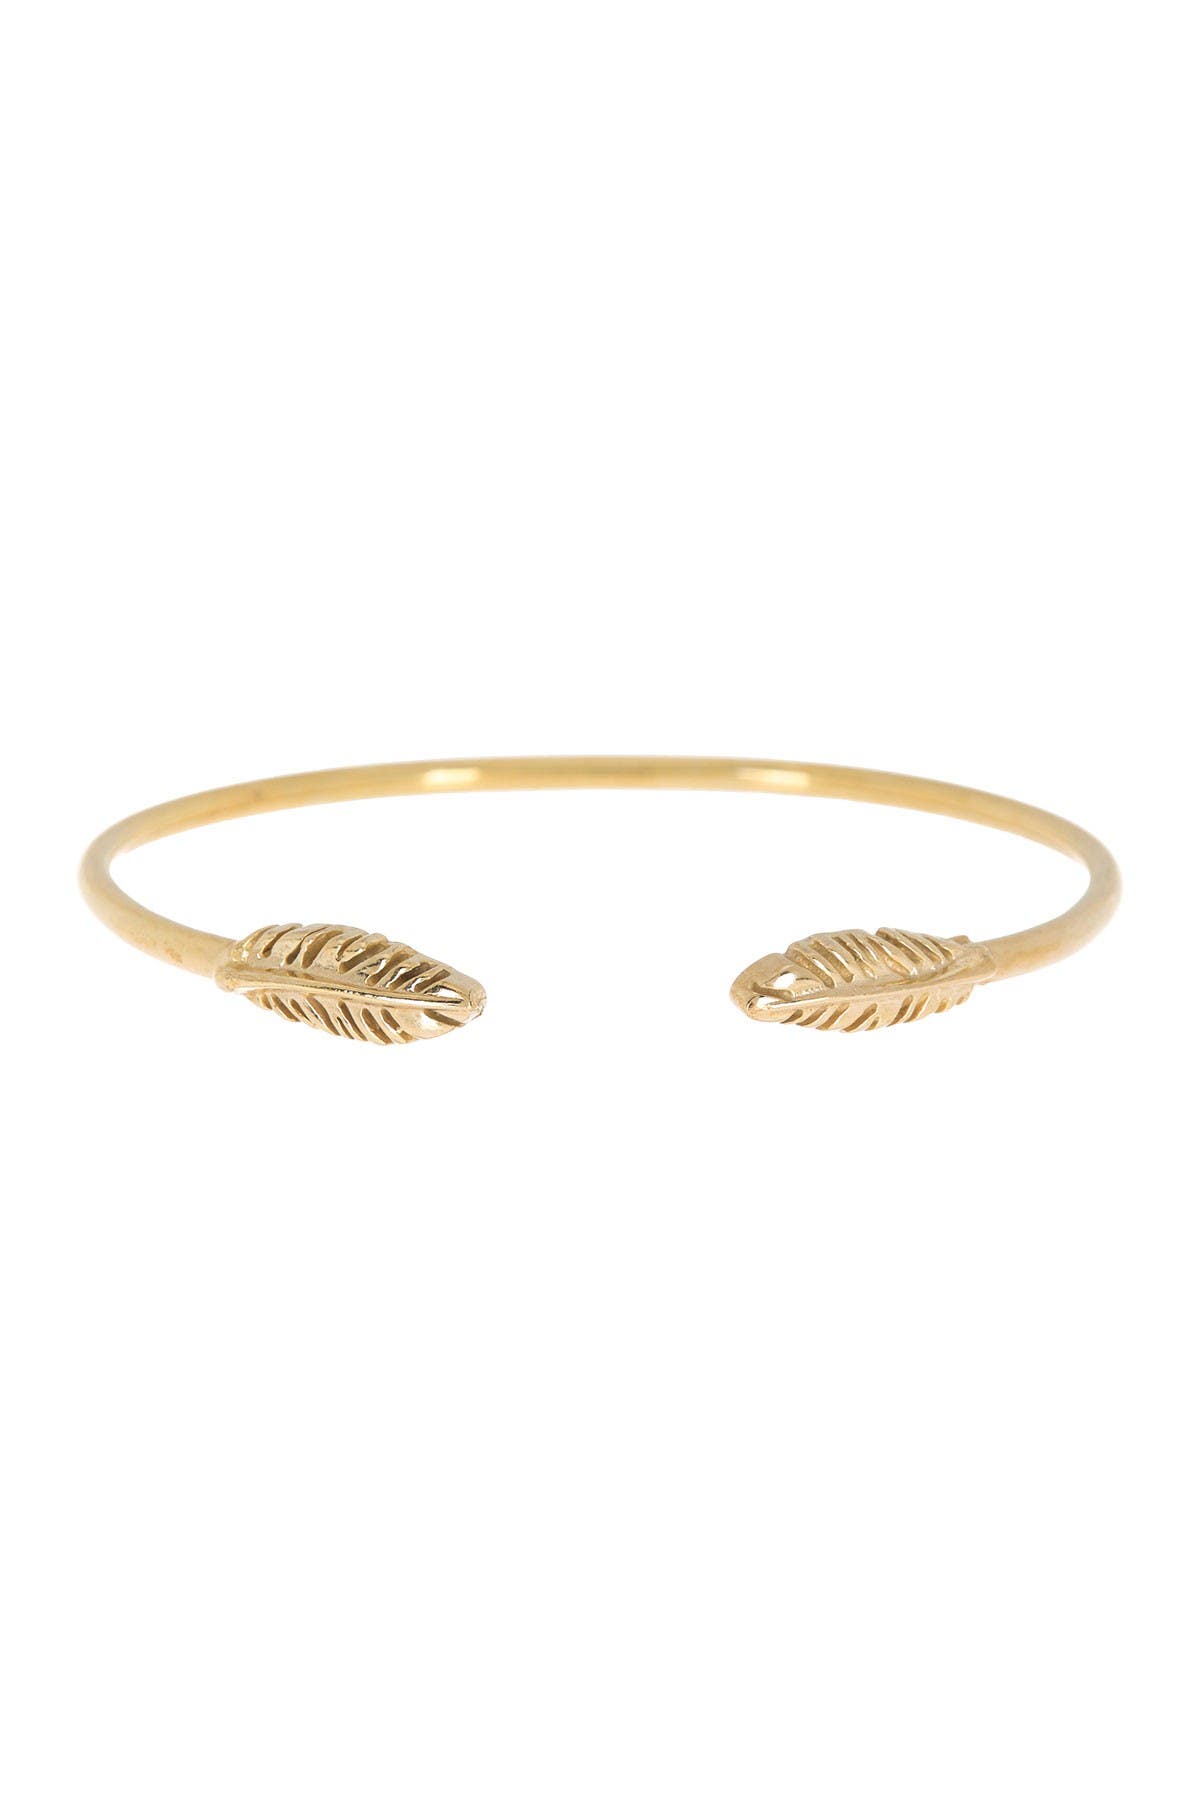 Alex And Ani 14k Gold Plated Feather Open Cuff Bracelet